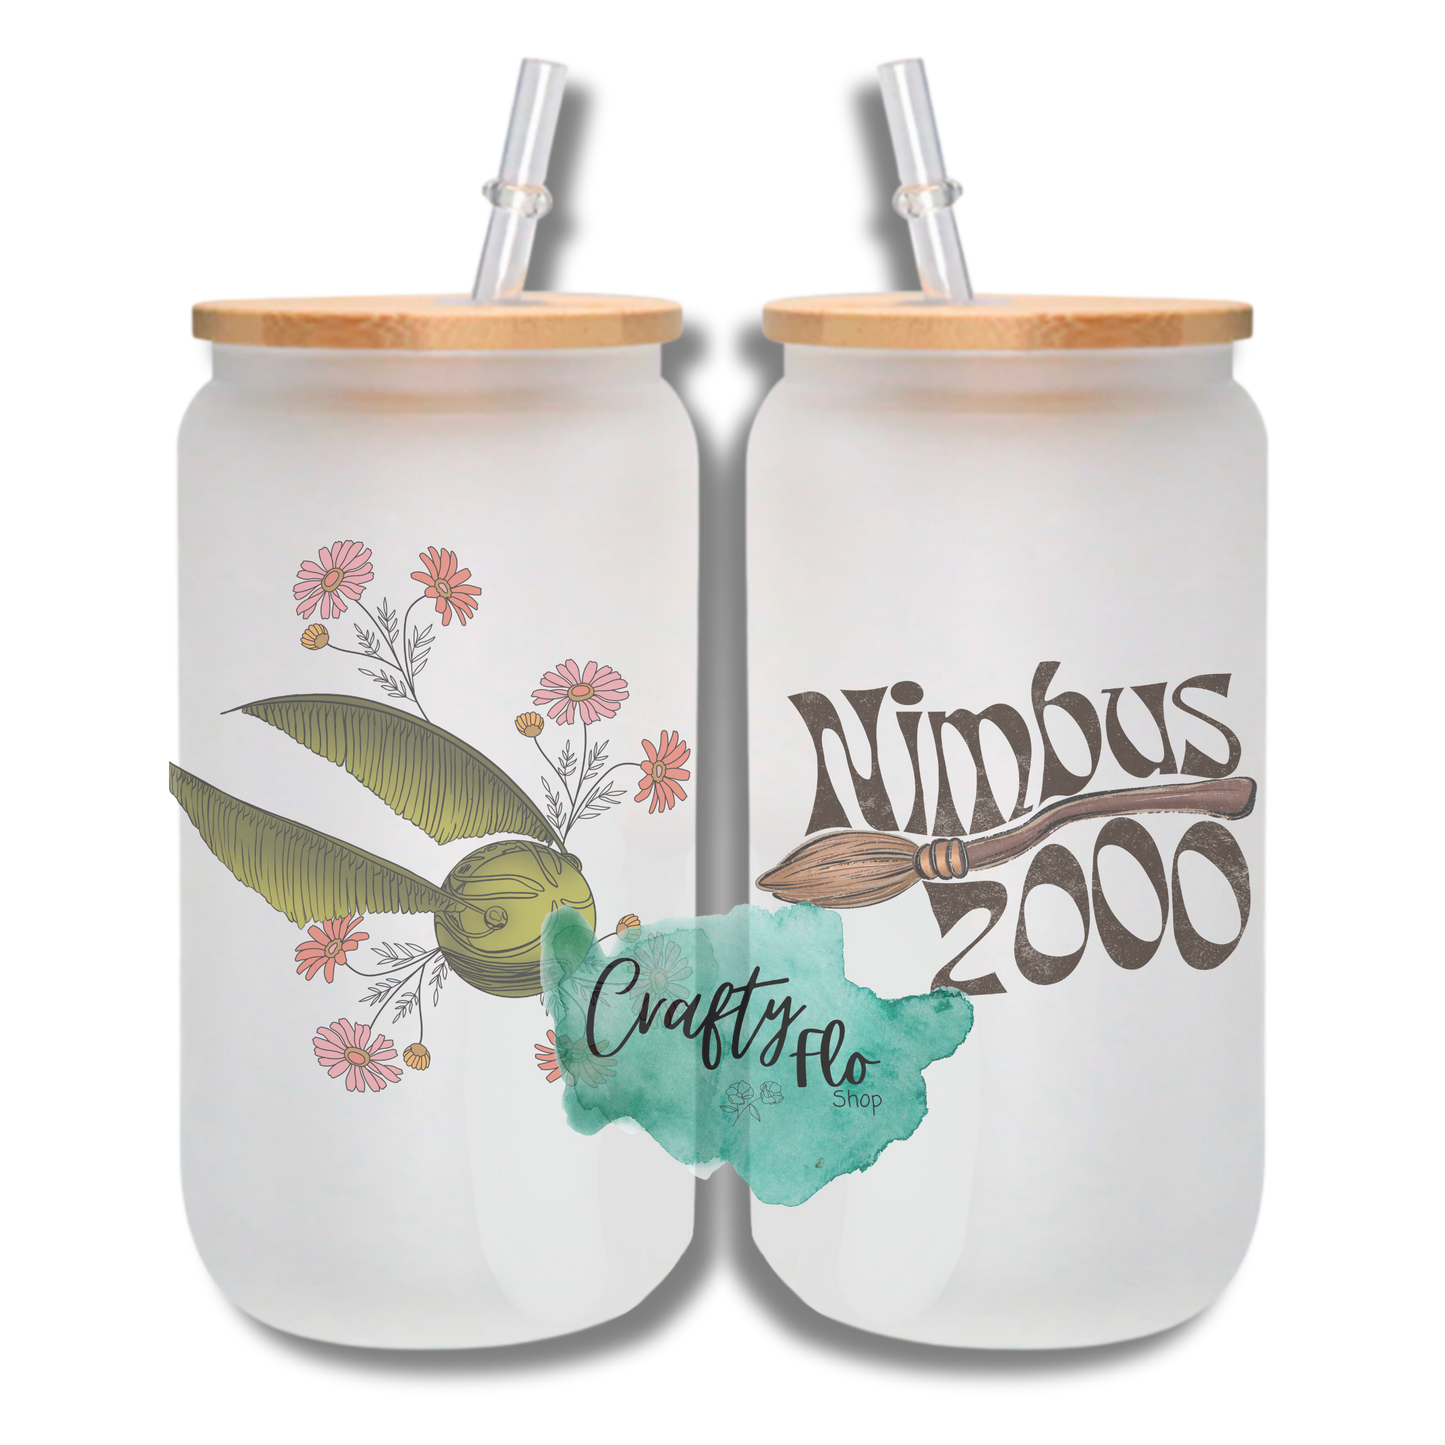 Wizarding School of Magic inspired fan art 16 oz frosted or clear glass can with bamboo lid and straw